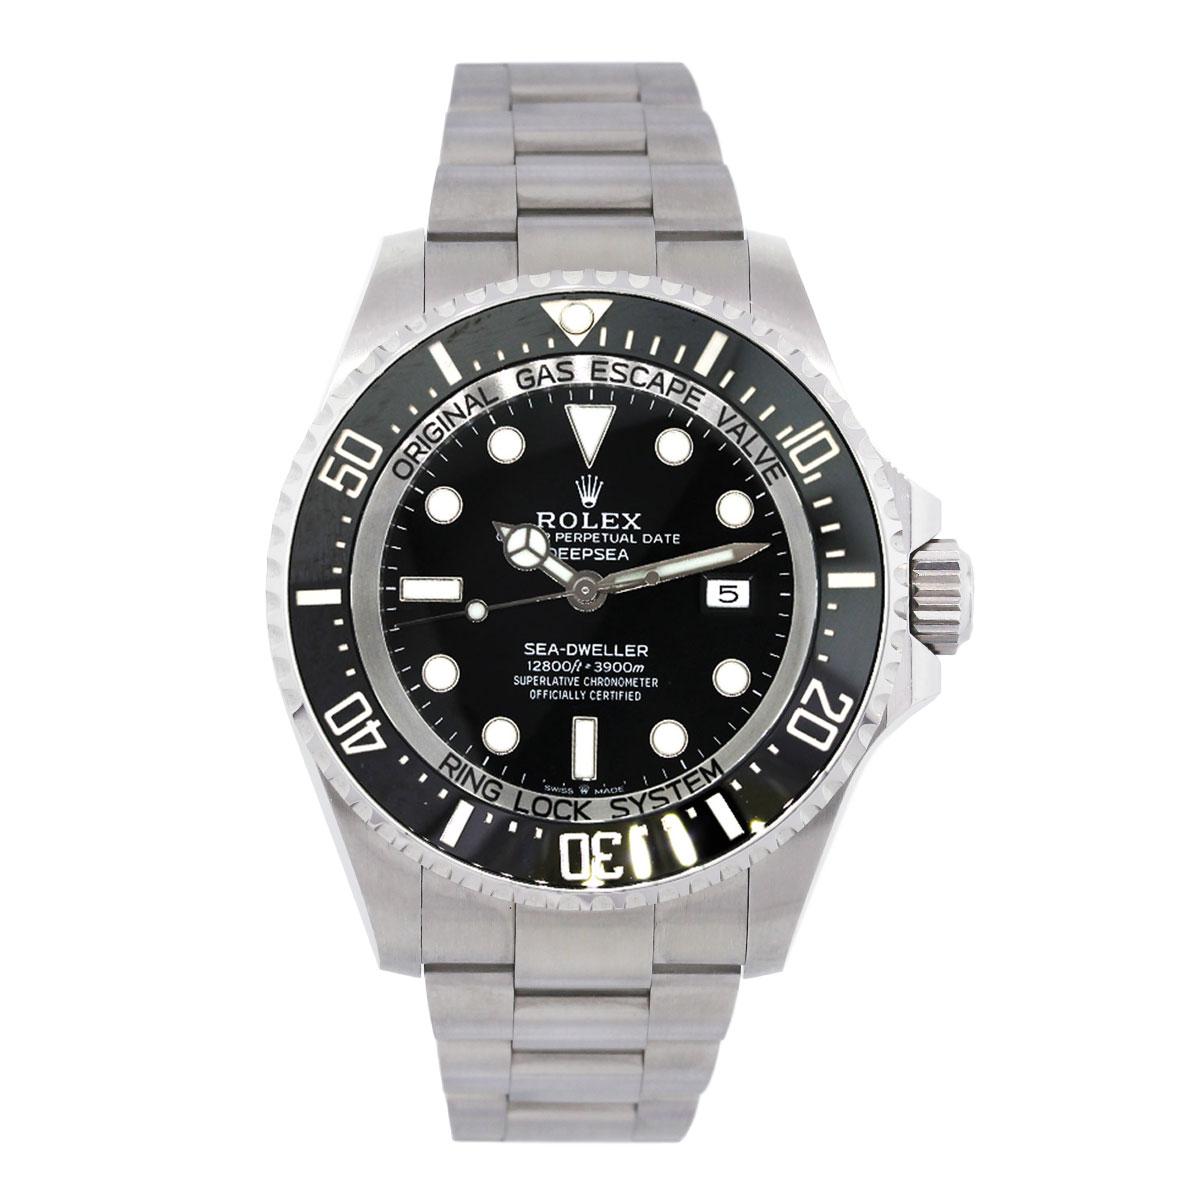 Brand: Rolex
MPN: 126660
Model: Sea-Dweller Deep Sea
Case Material: Stainless Steel
Case Diameter: 44mm
Crystal: Scratch resistant sapphire
Bezel: Black ceramic bezel
Dial: Black dial
Bracelet: Stainless steel oyster band
Size: Will fit a 8″